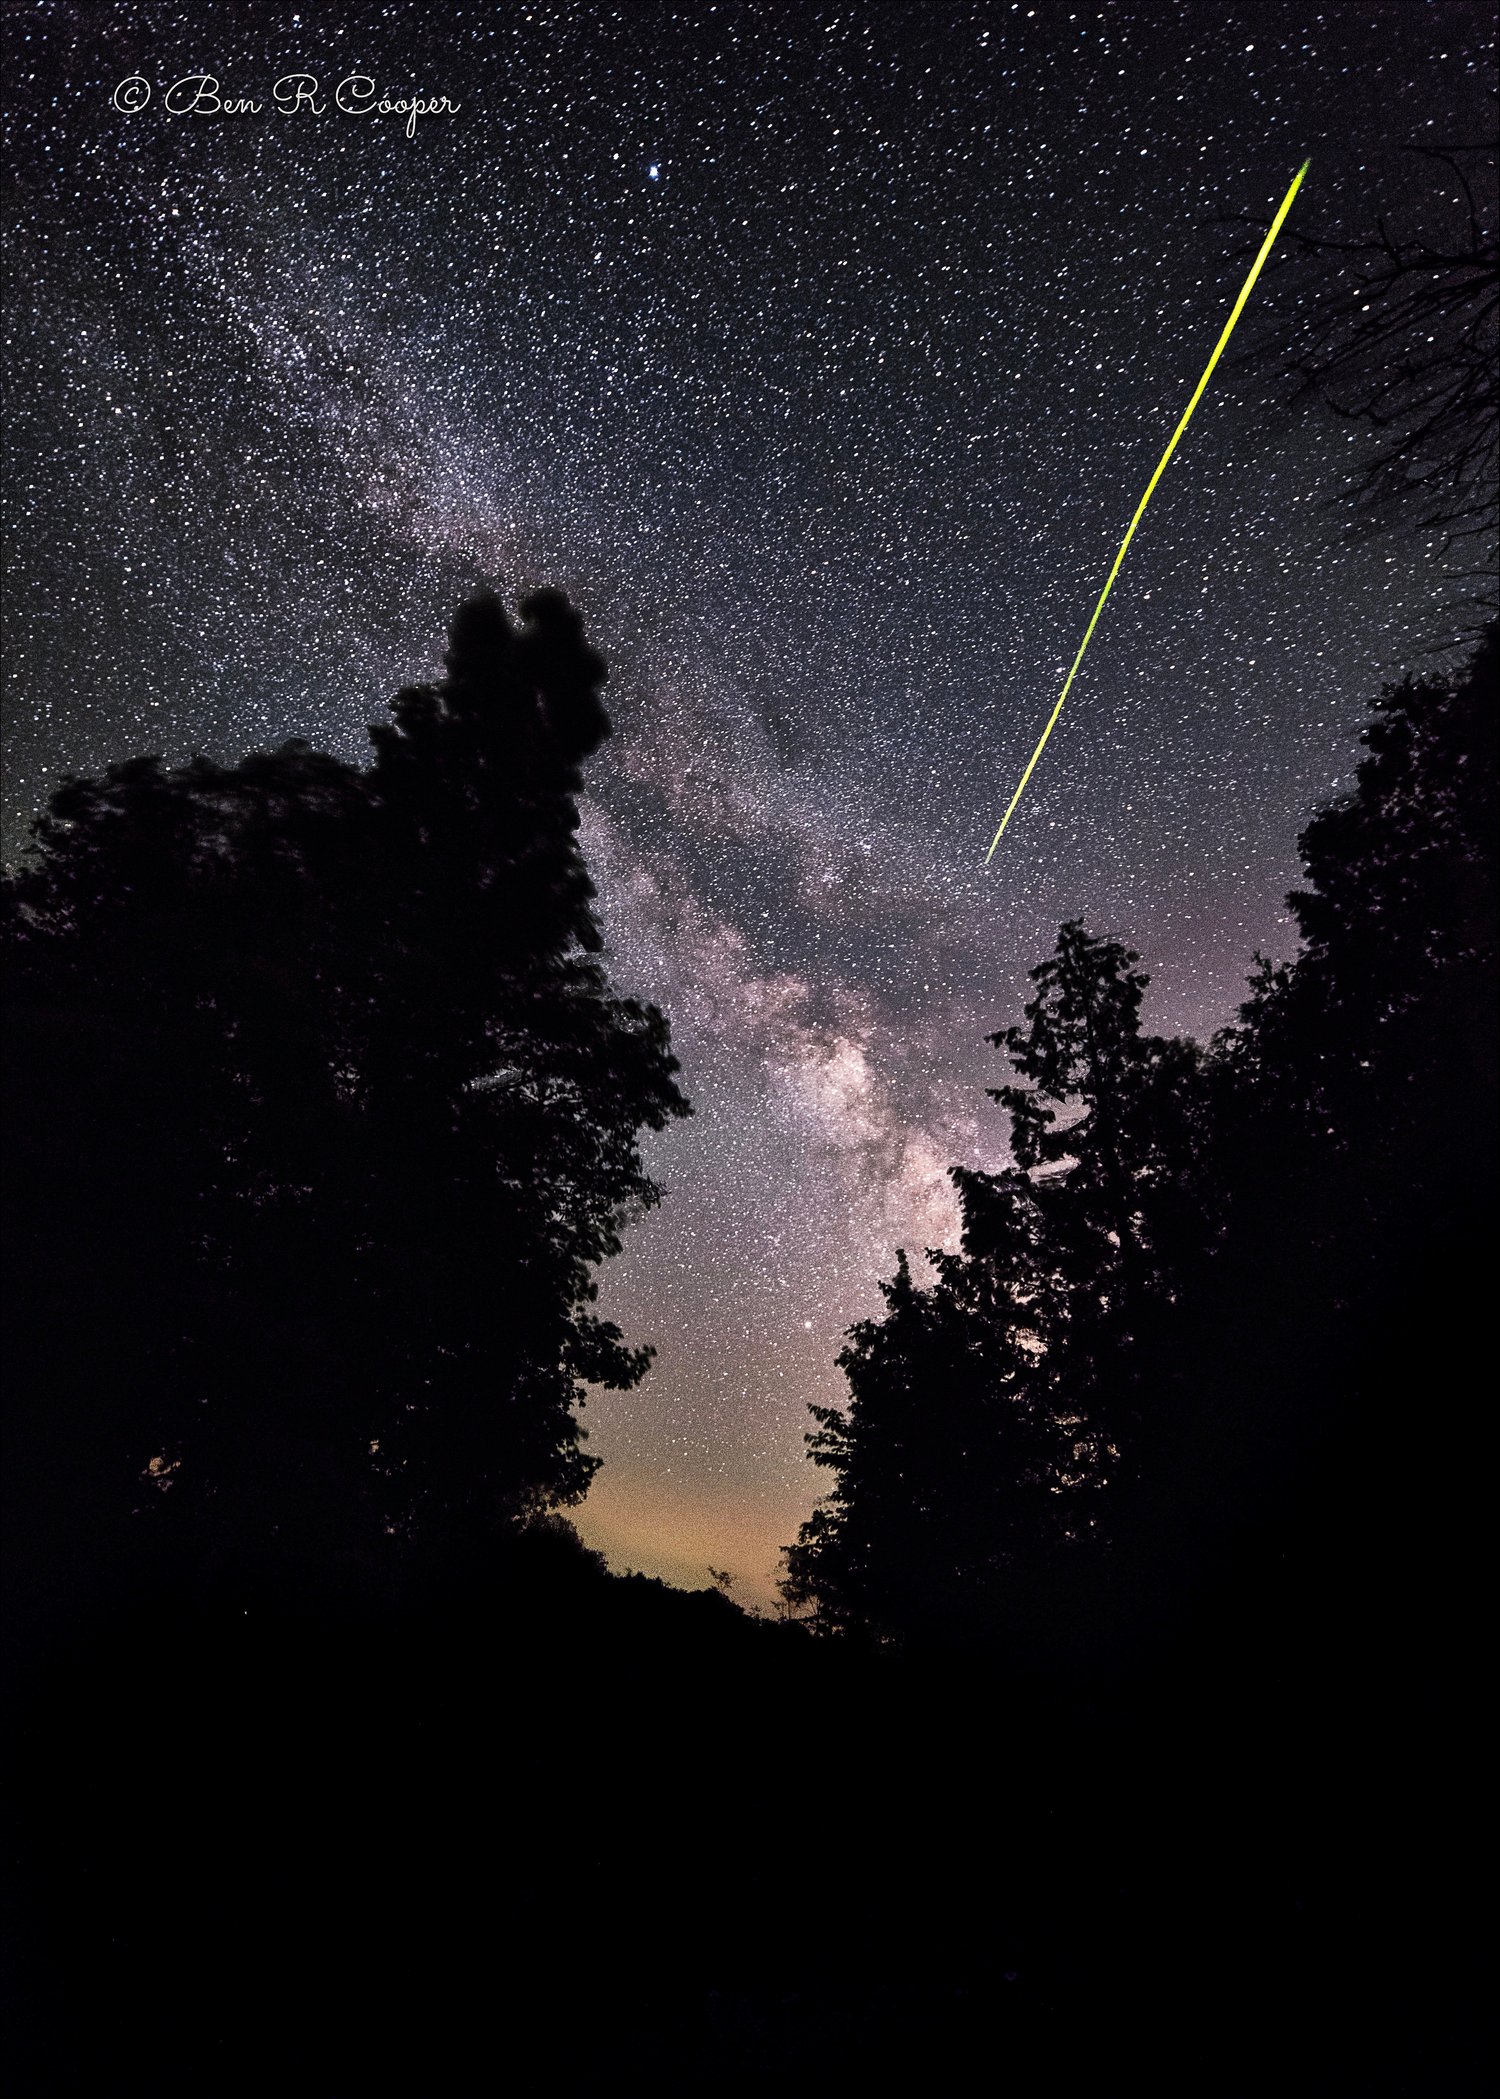 Firefly and the Milky Way